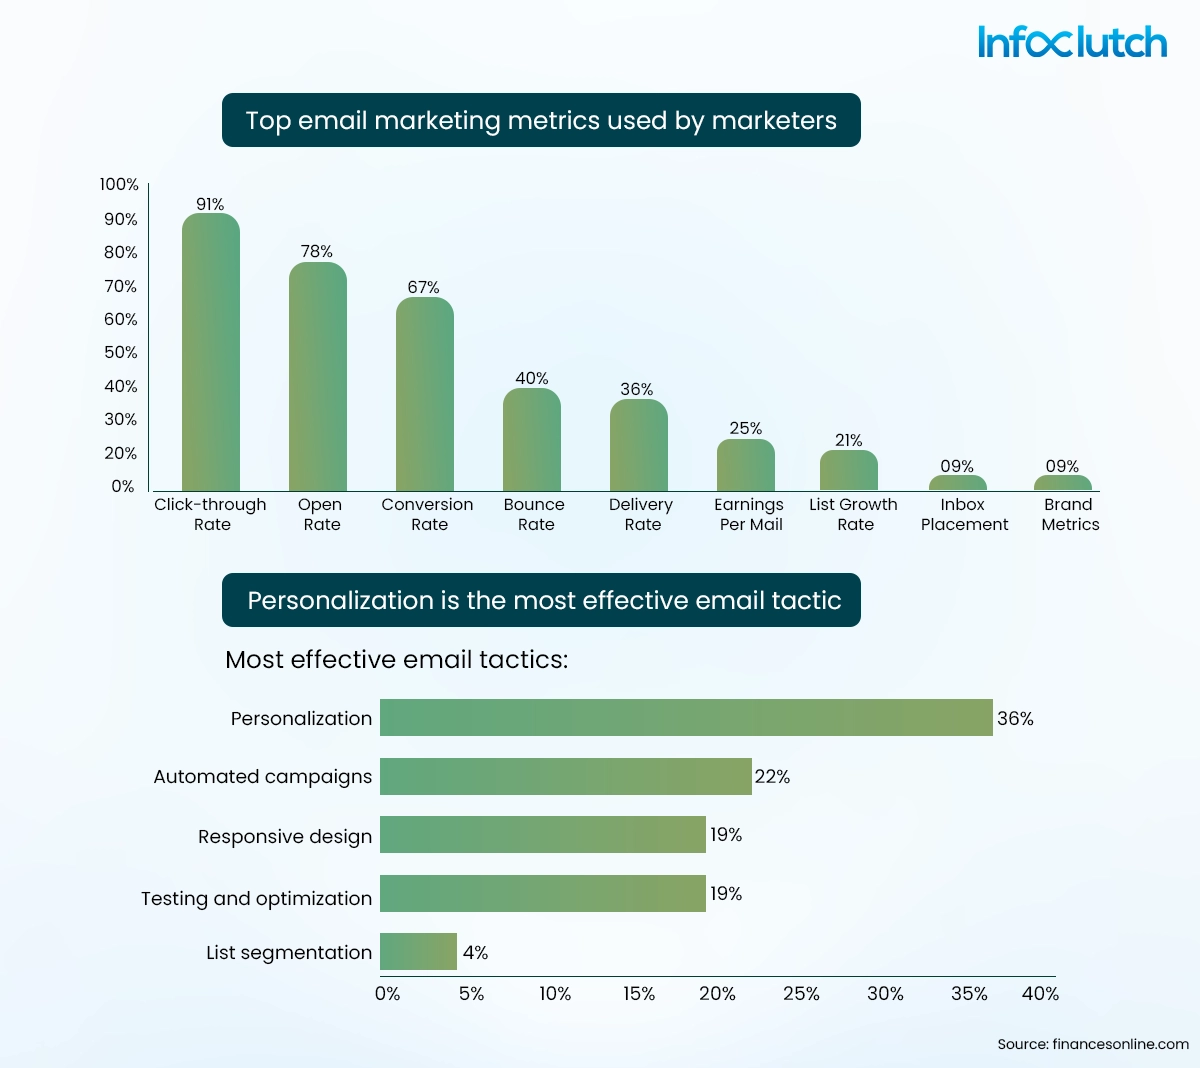 Email Marketing in Financial Services: Statistics and Trends